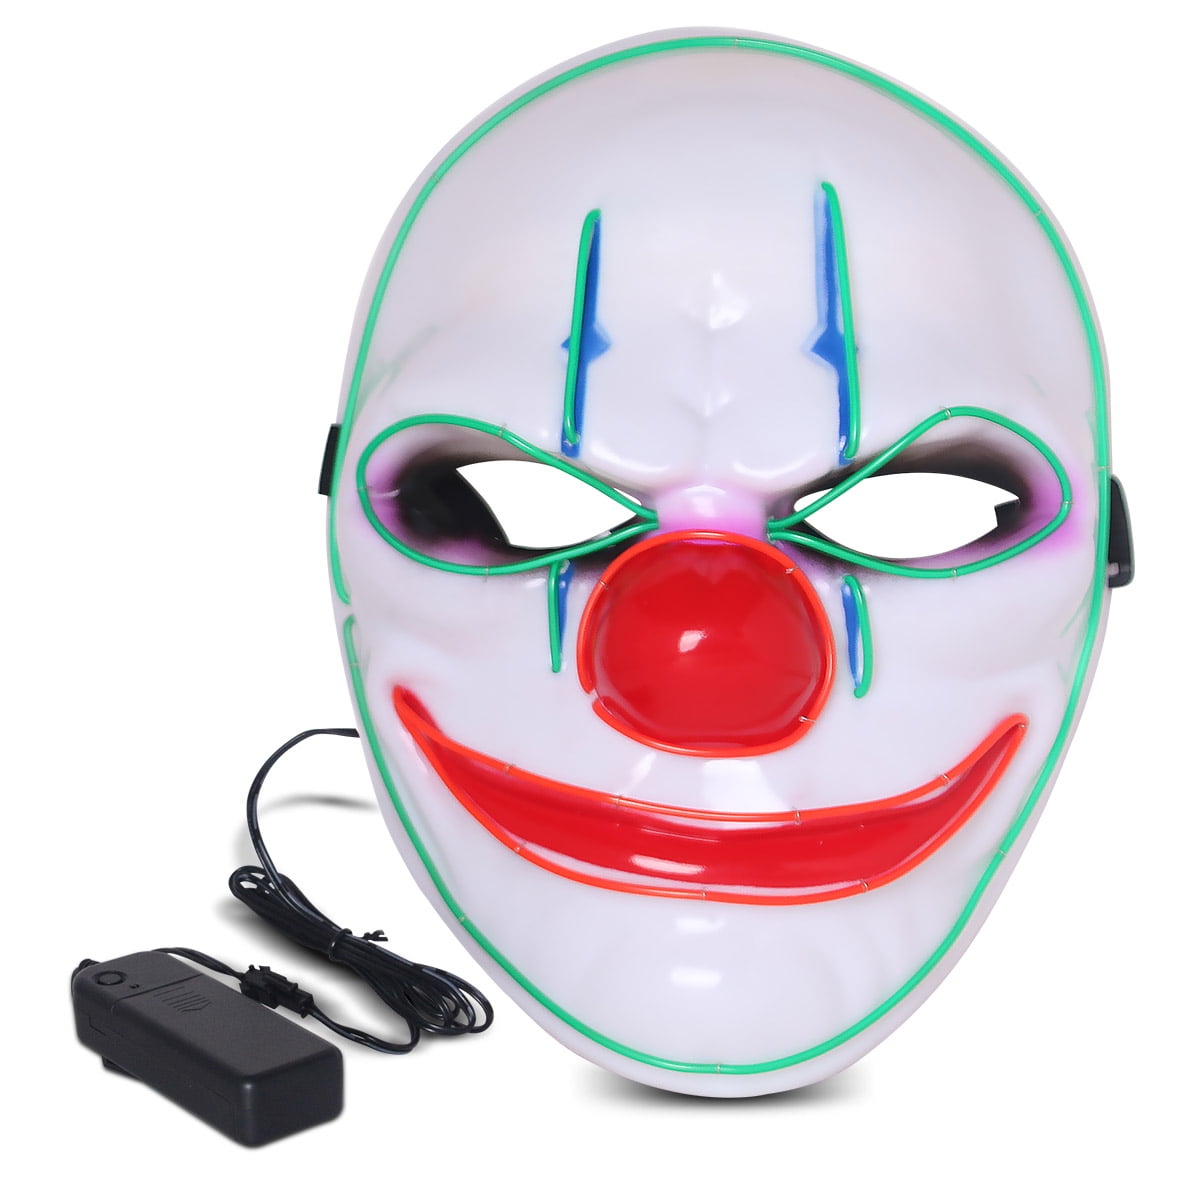 Halloween Purge Mask Led Light Up Glowing Scary Mask with EL Wire for Kids Adults Costume Cosplay